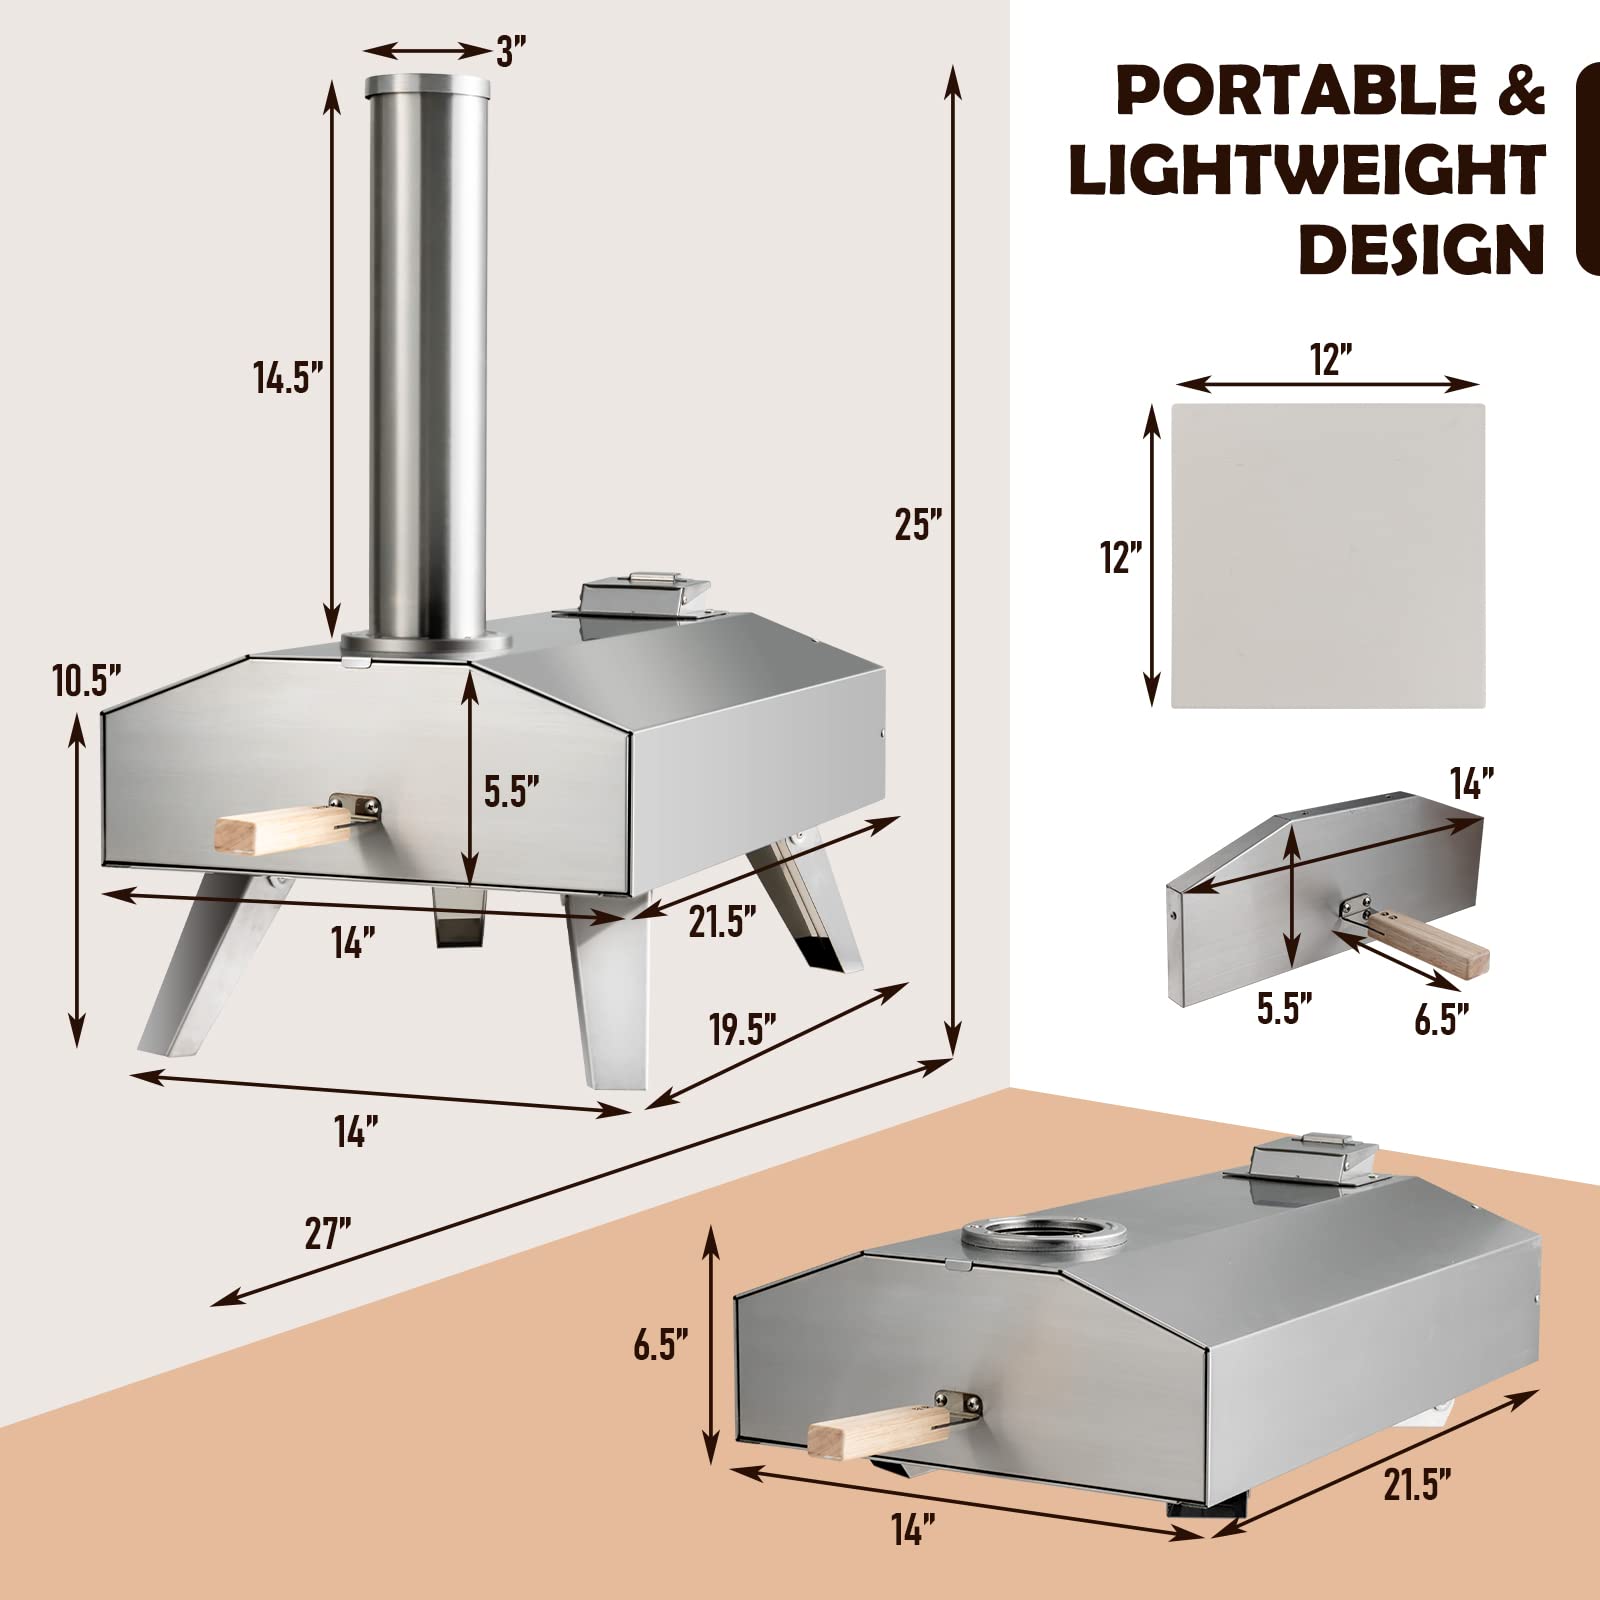 Giantex Outdoor Pizza Oven with 12'' Pizza Stone, Foldable Legs, Portable Stainless Steel Steel Pizza Maker for Outside